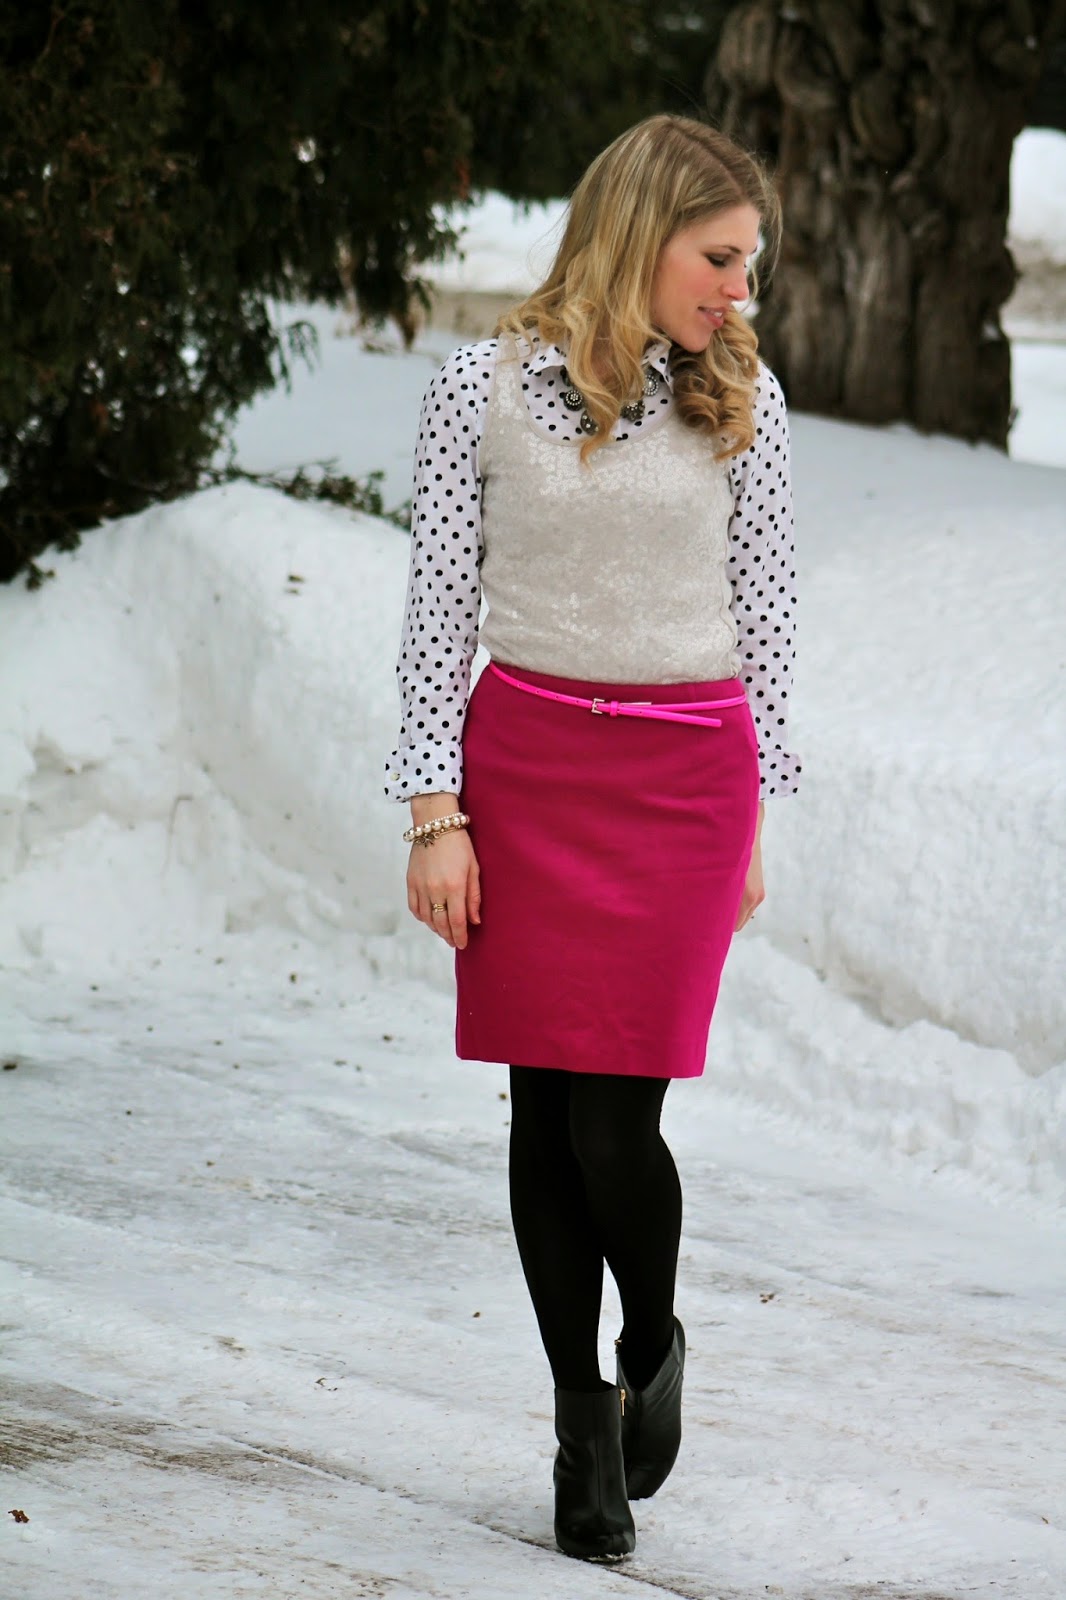 I do deClaire: Valentine's Day with Pink, Polka Dots, and Sequins!